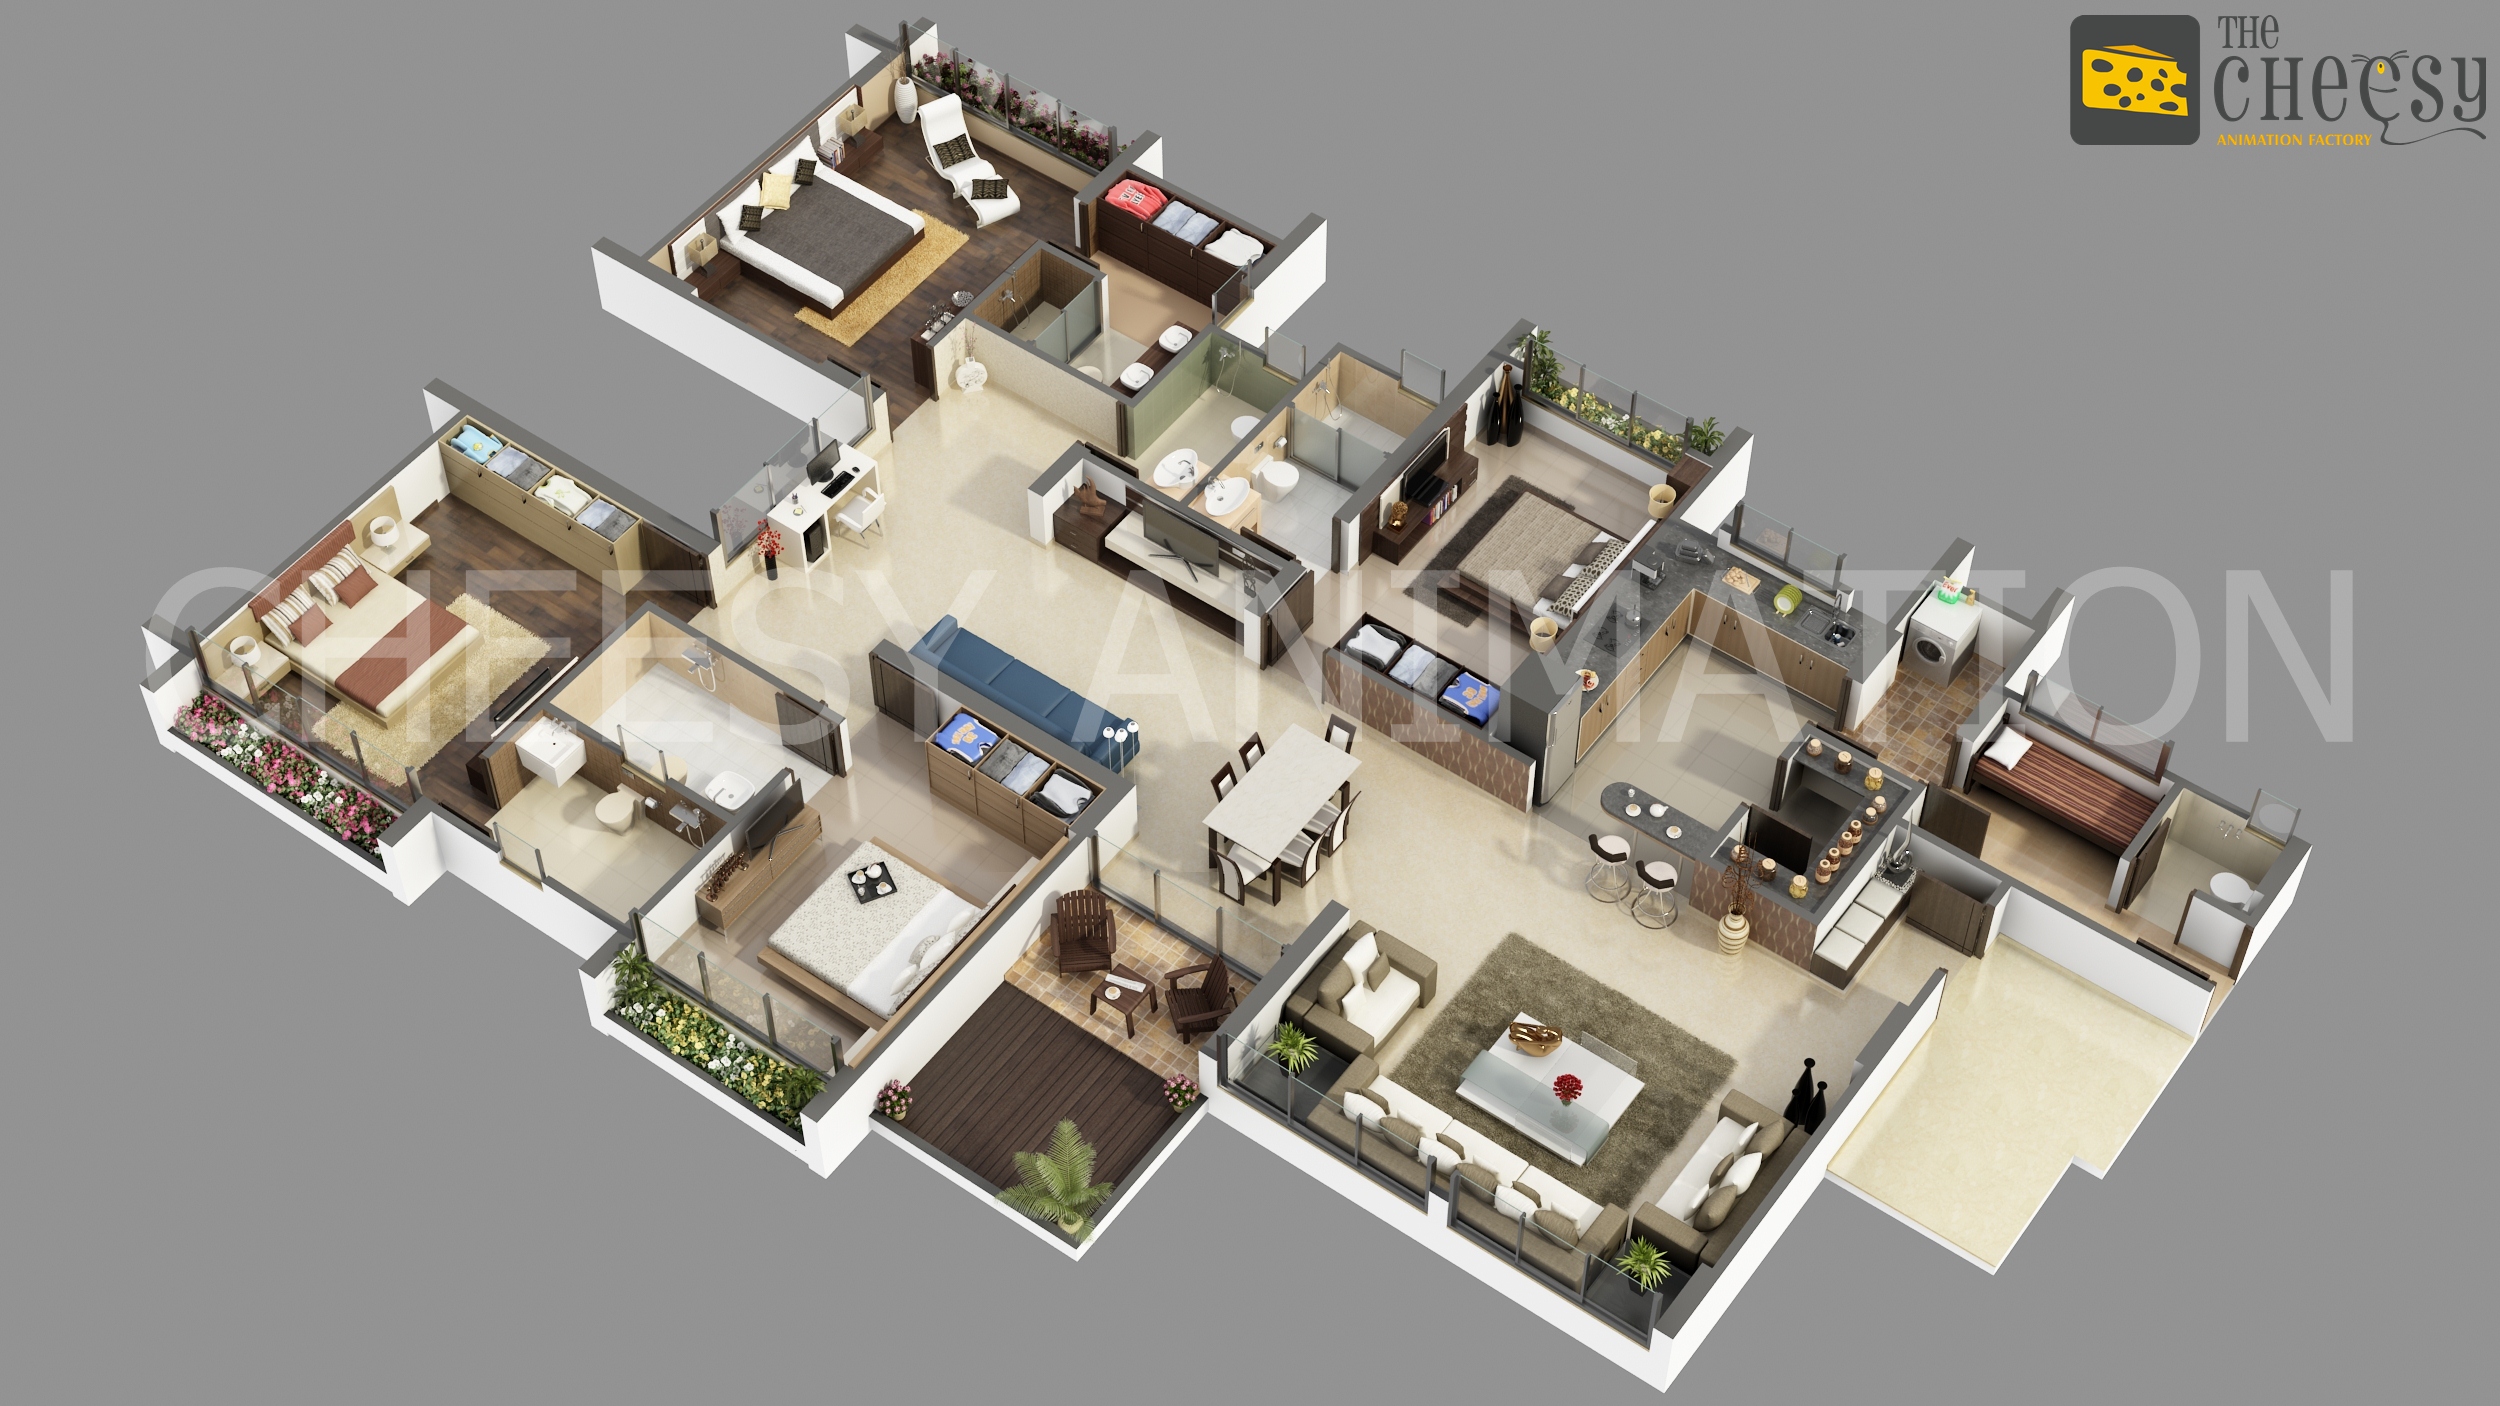  3D  Floor Plan  in India  3D  Floor Plan  3D  Floor Plan  For 